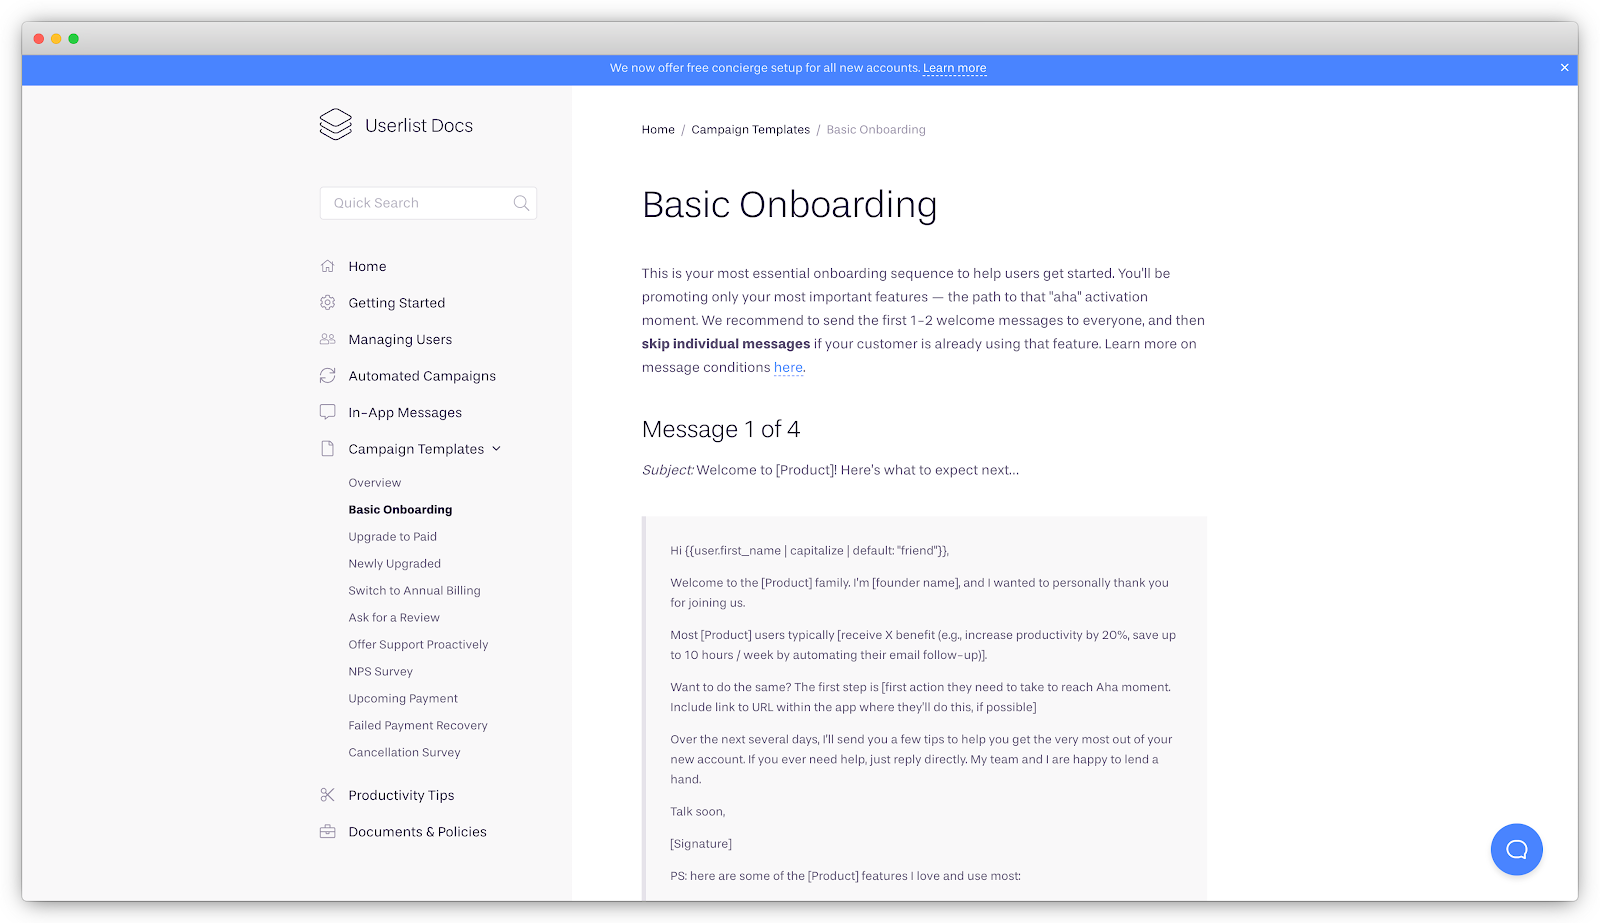 A screenshot of Userlist's simple copy-and-paste templates of emails and in-app messages users can use for onboarding